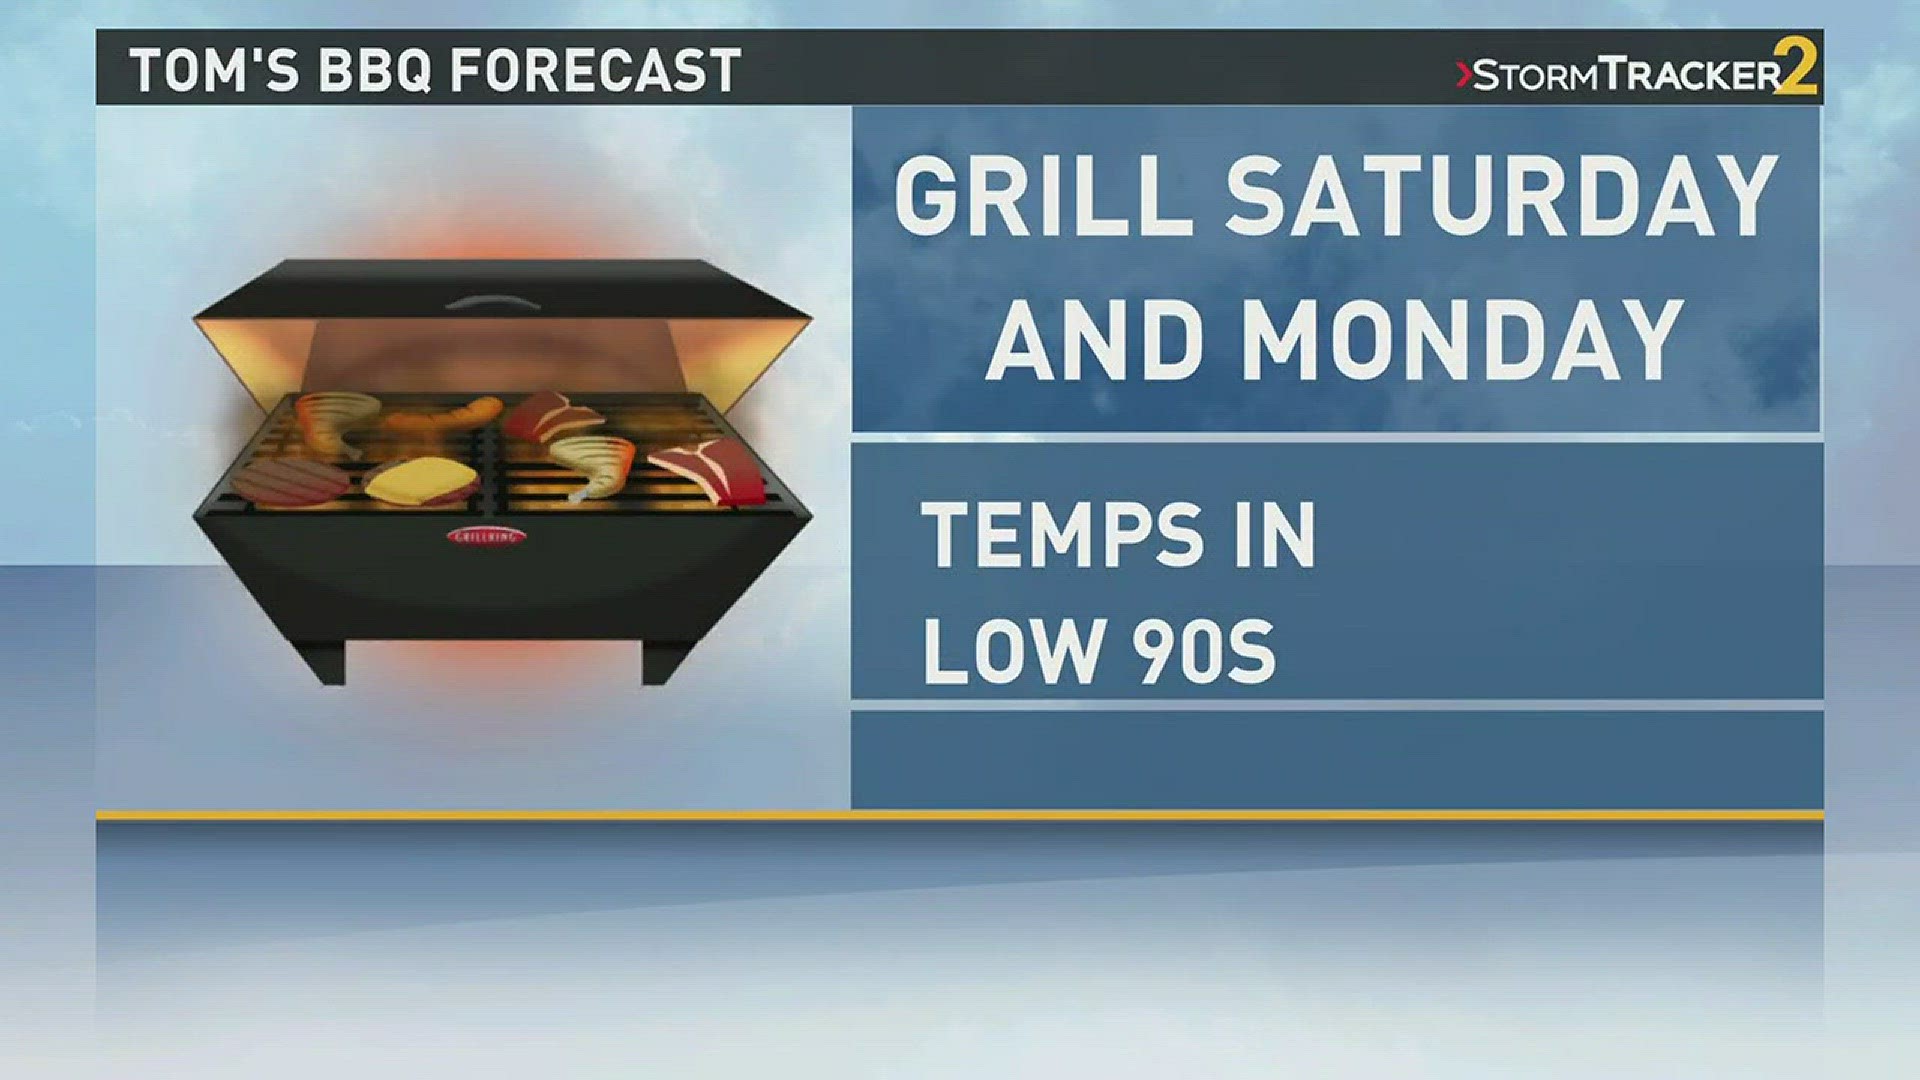 Tom's BBQ Forecast: Hamburgers and Hot Dogs (8-31-2017)